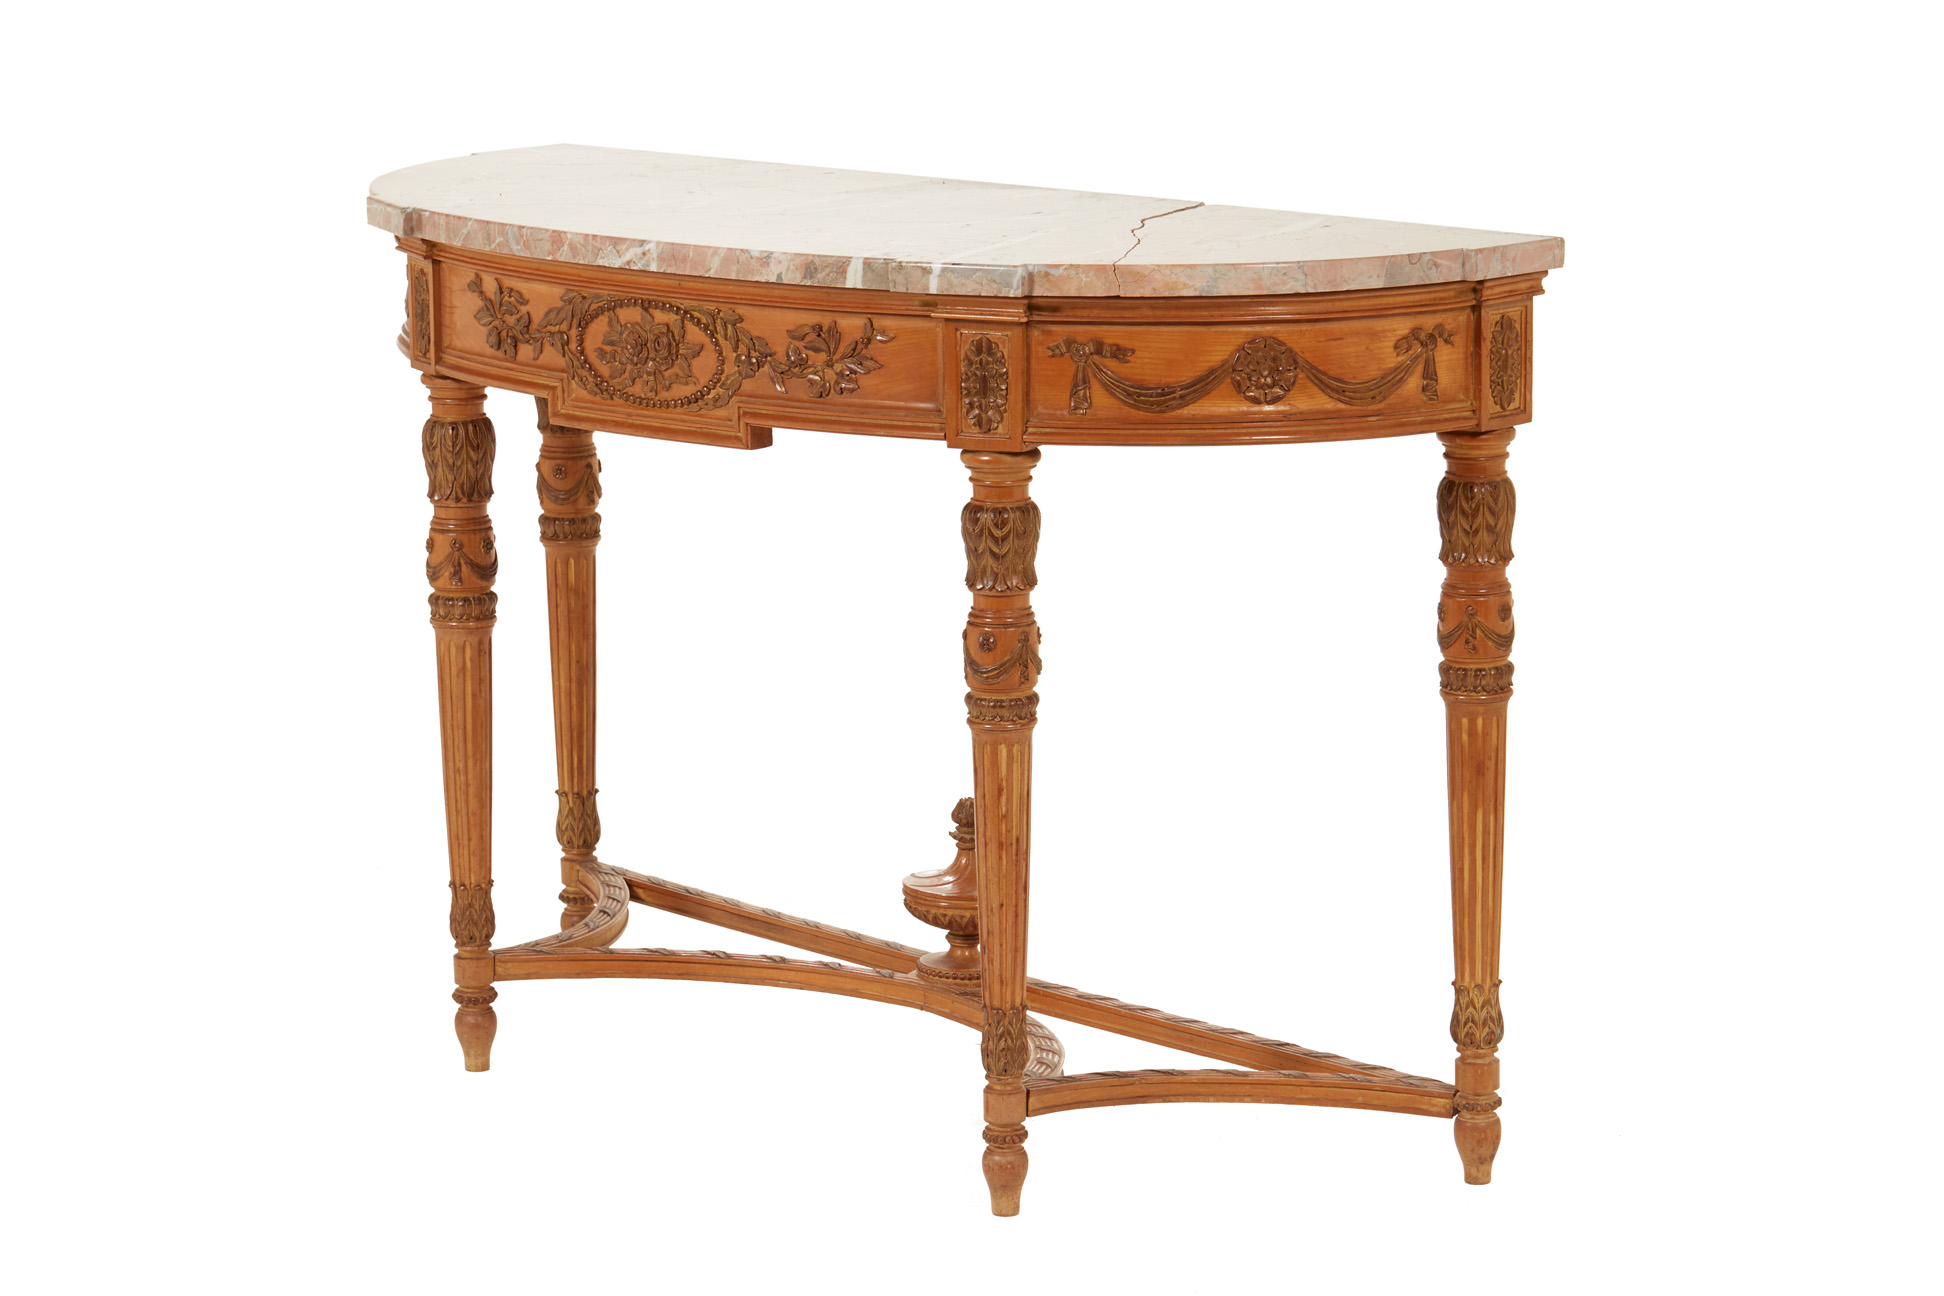 A FRENCH DEMI-LUNE MARBLE TOP CONSOLE TABLE - Image 2 of 8